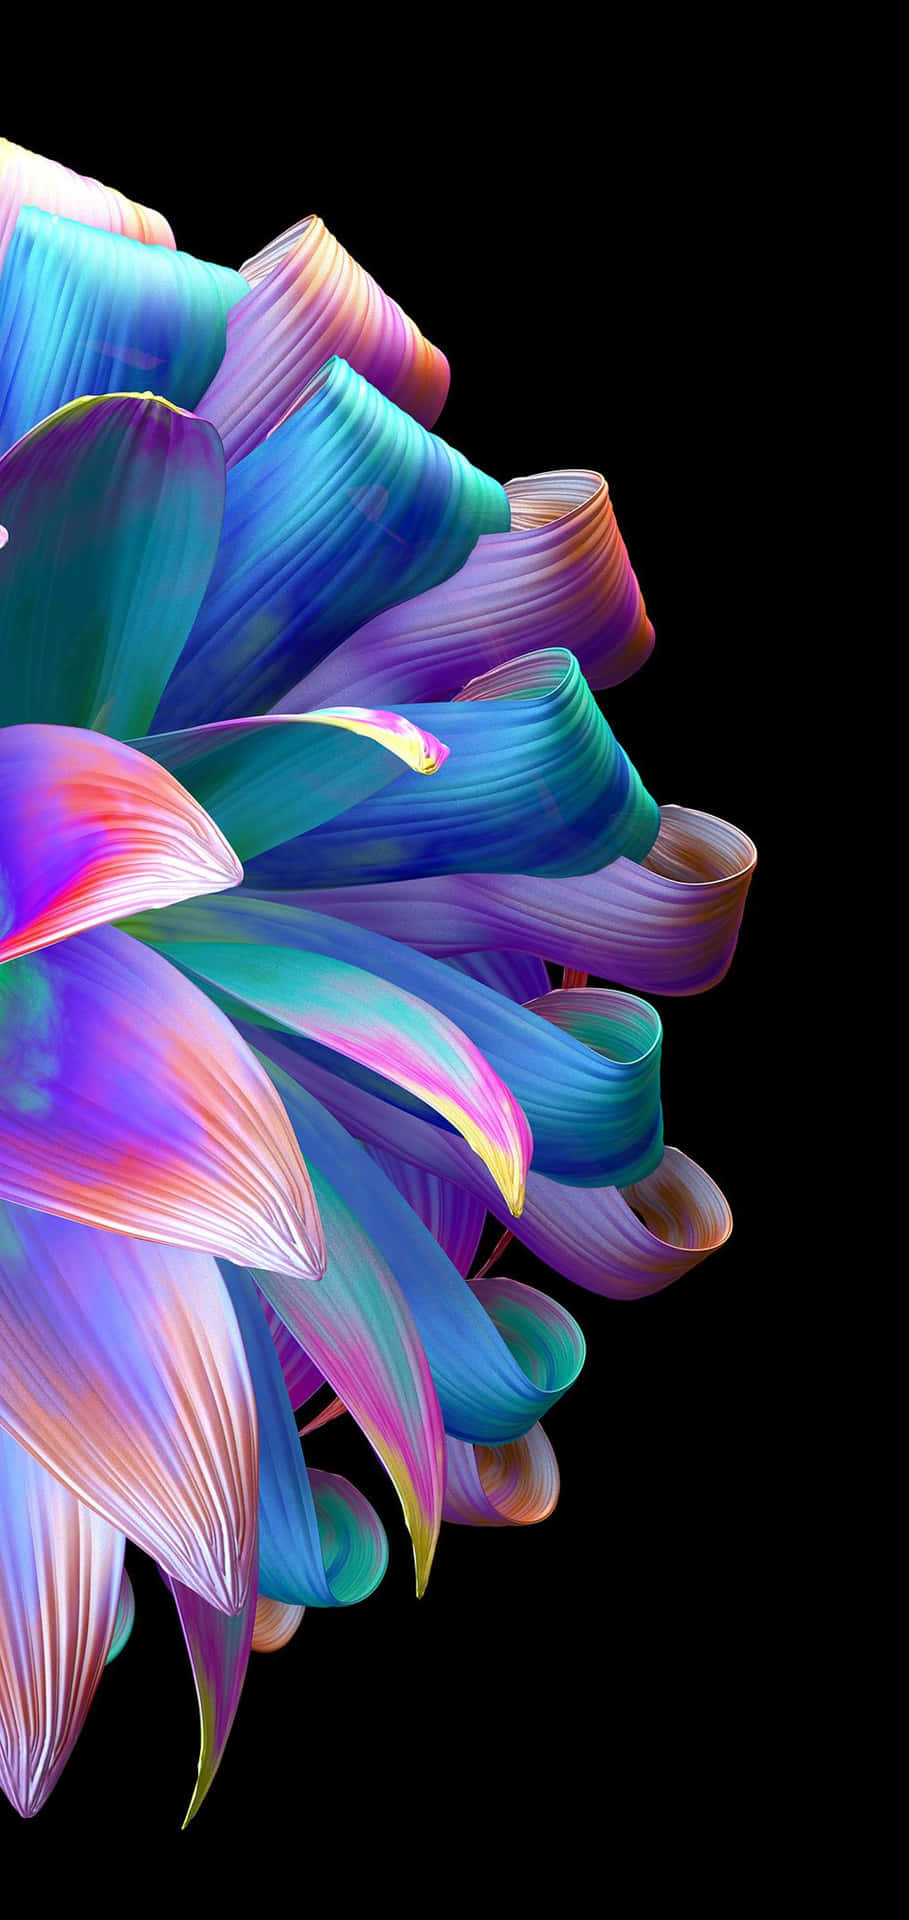 Enjoy vibrant colors and clear visuals with an Android OLED background.